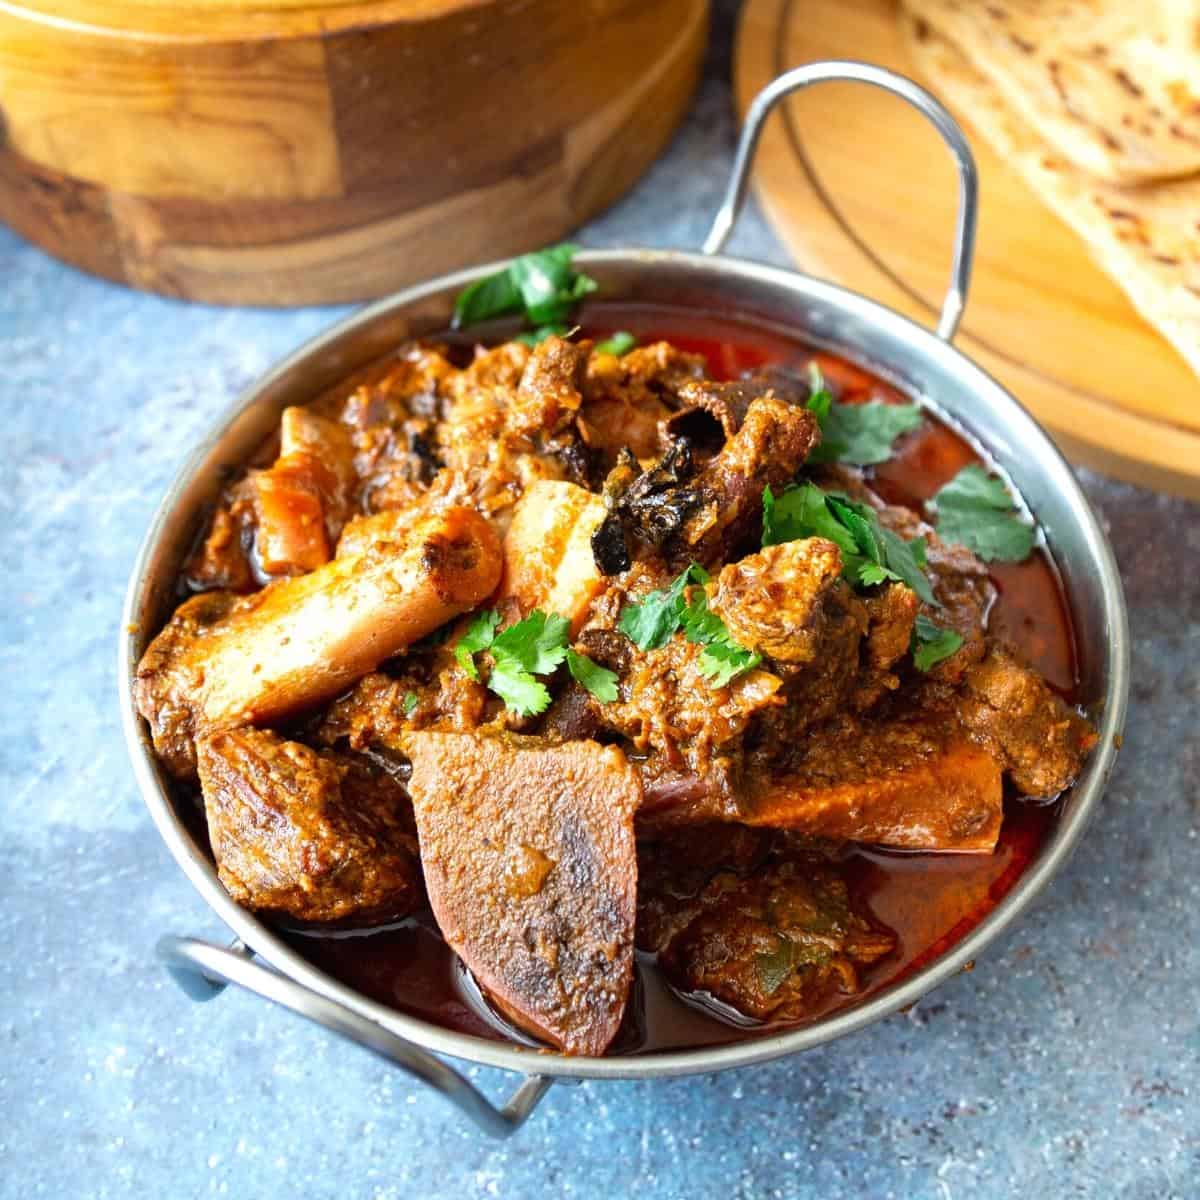 An Indian serving dish with goat curry.